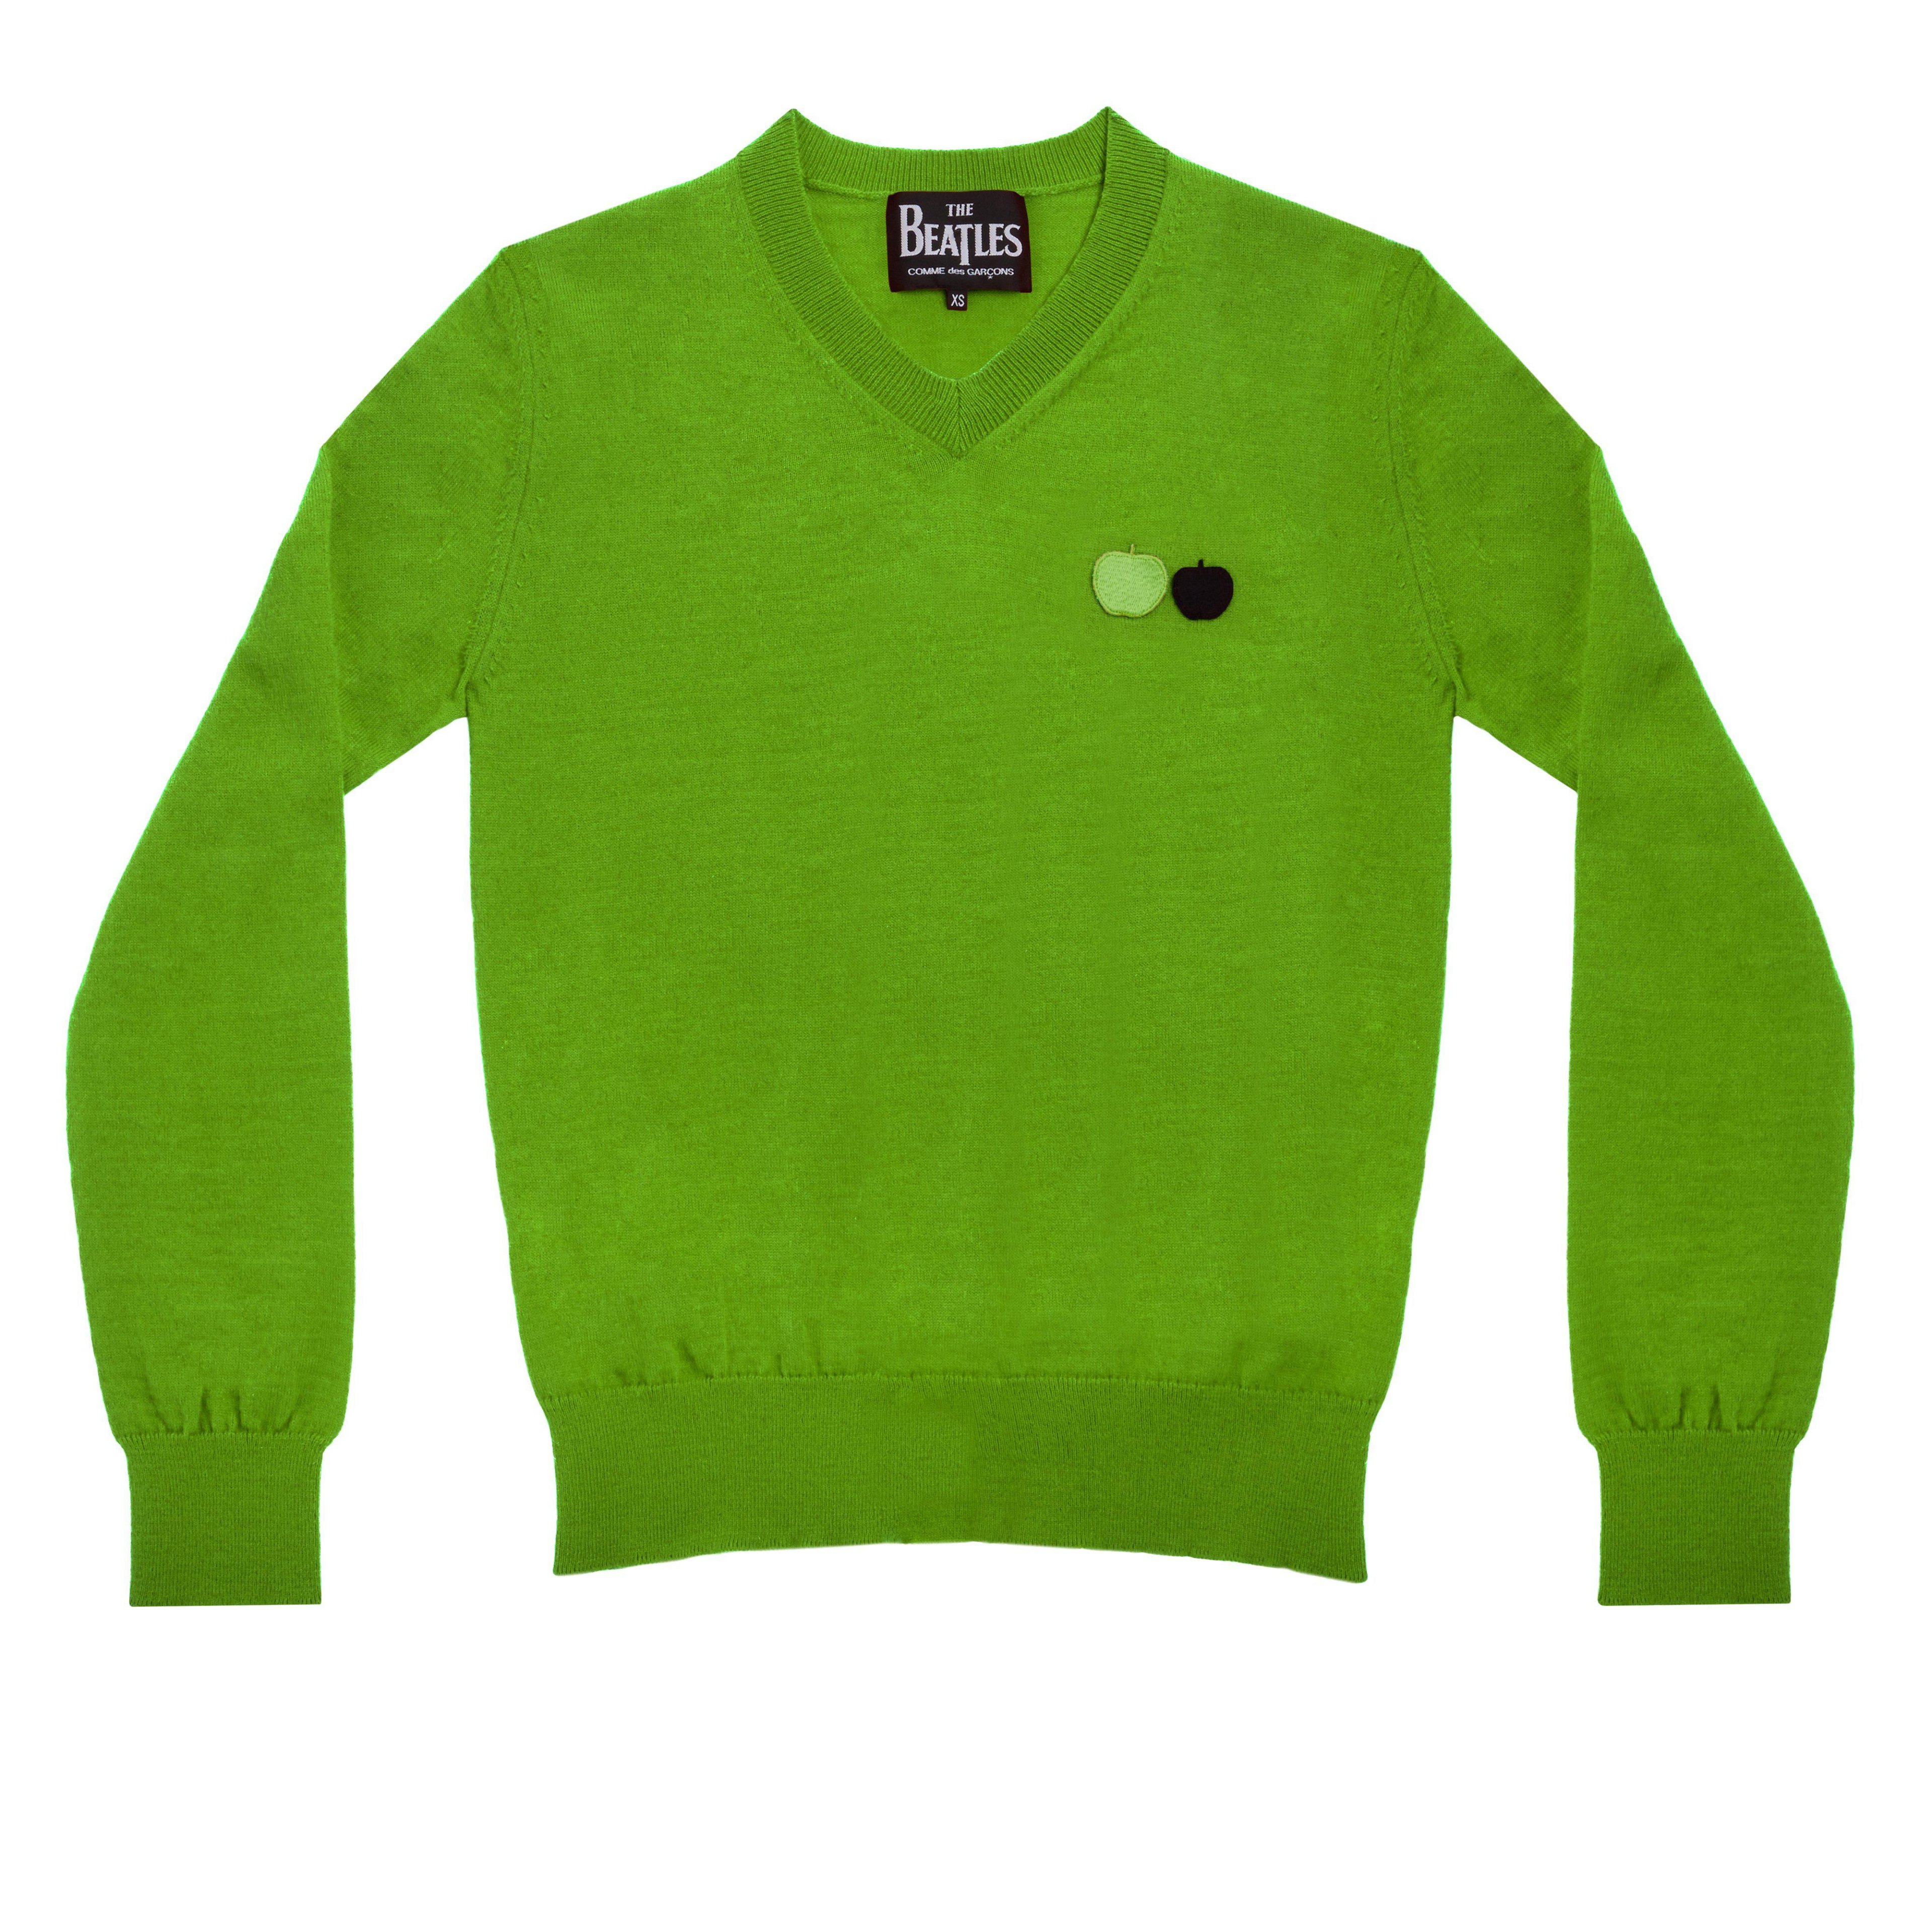 CDG Beatles - Unisex Pullover - (Green) by COMME DES GARCONS